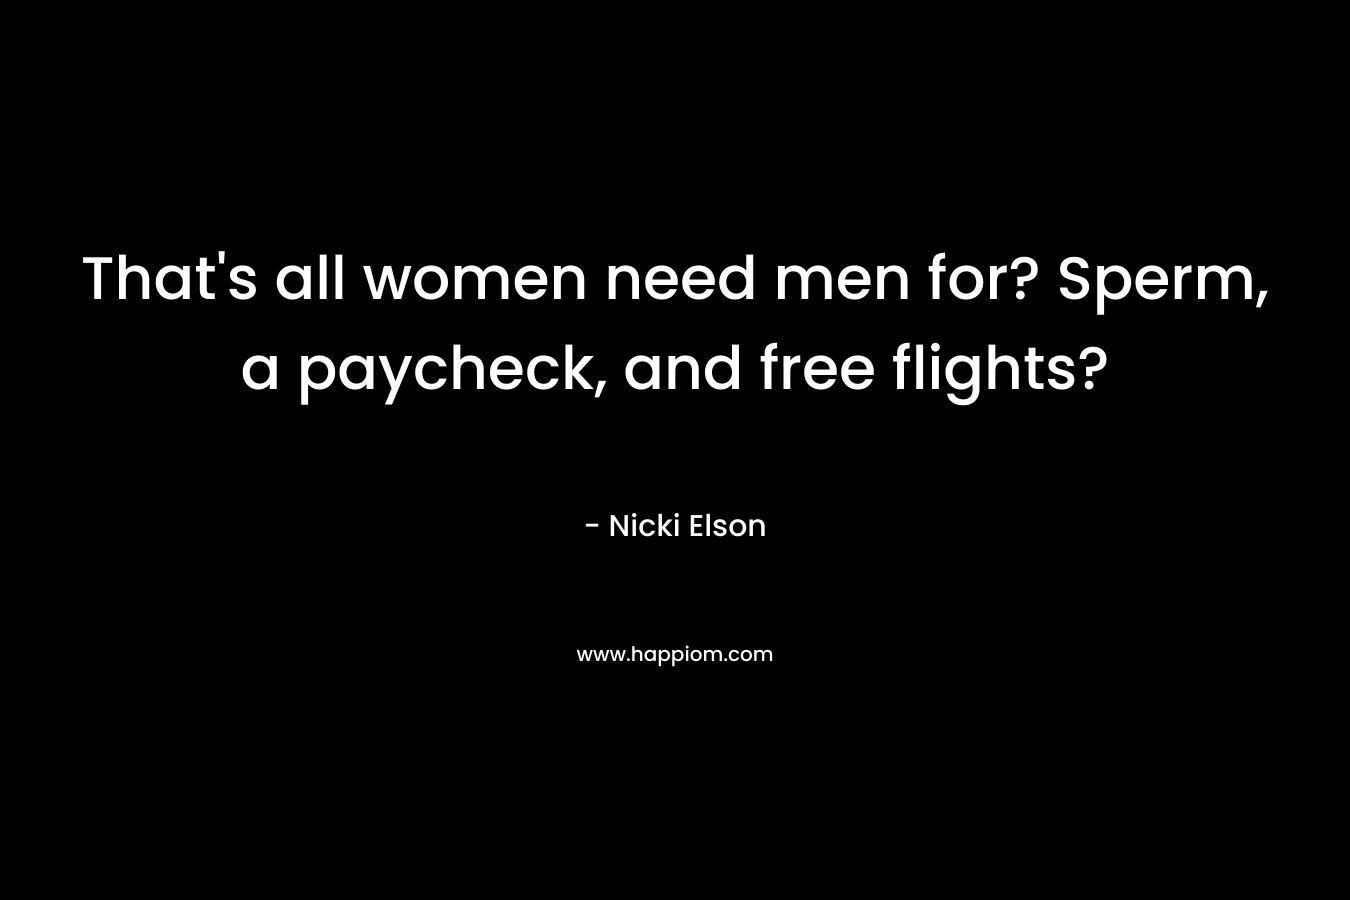 That’s all women need men for? Sperm, a paycheck, and free flights? – Nicki Elson